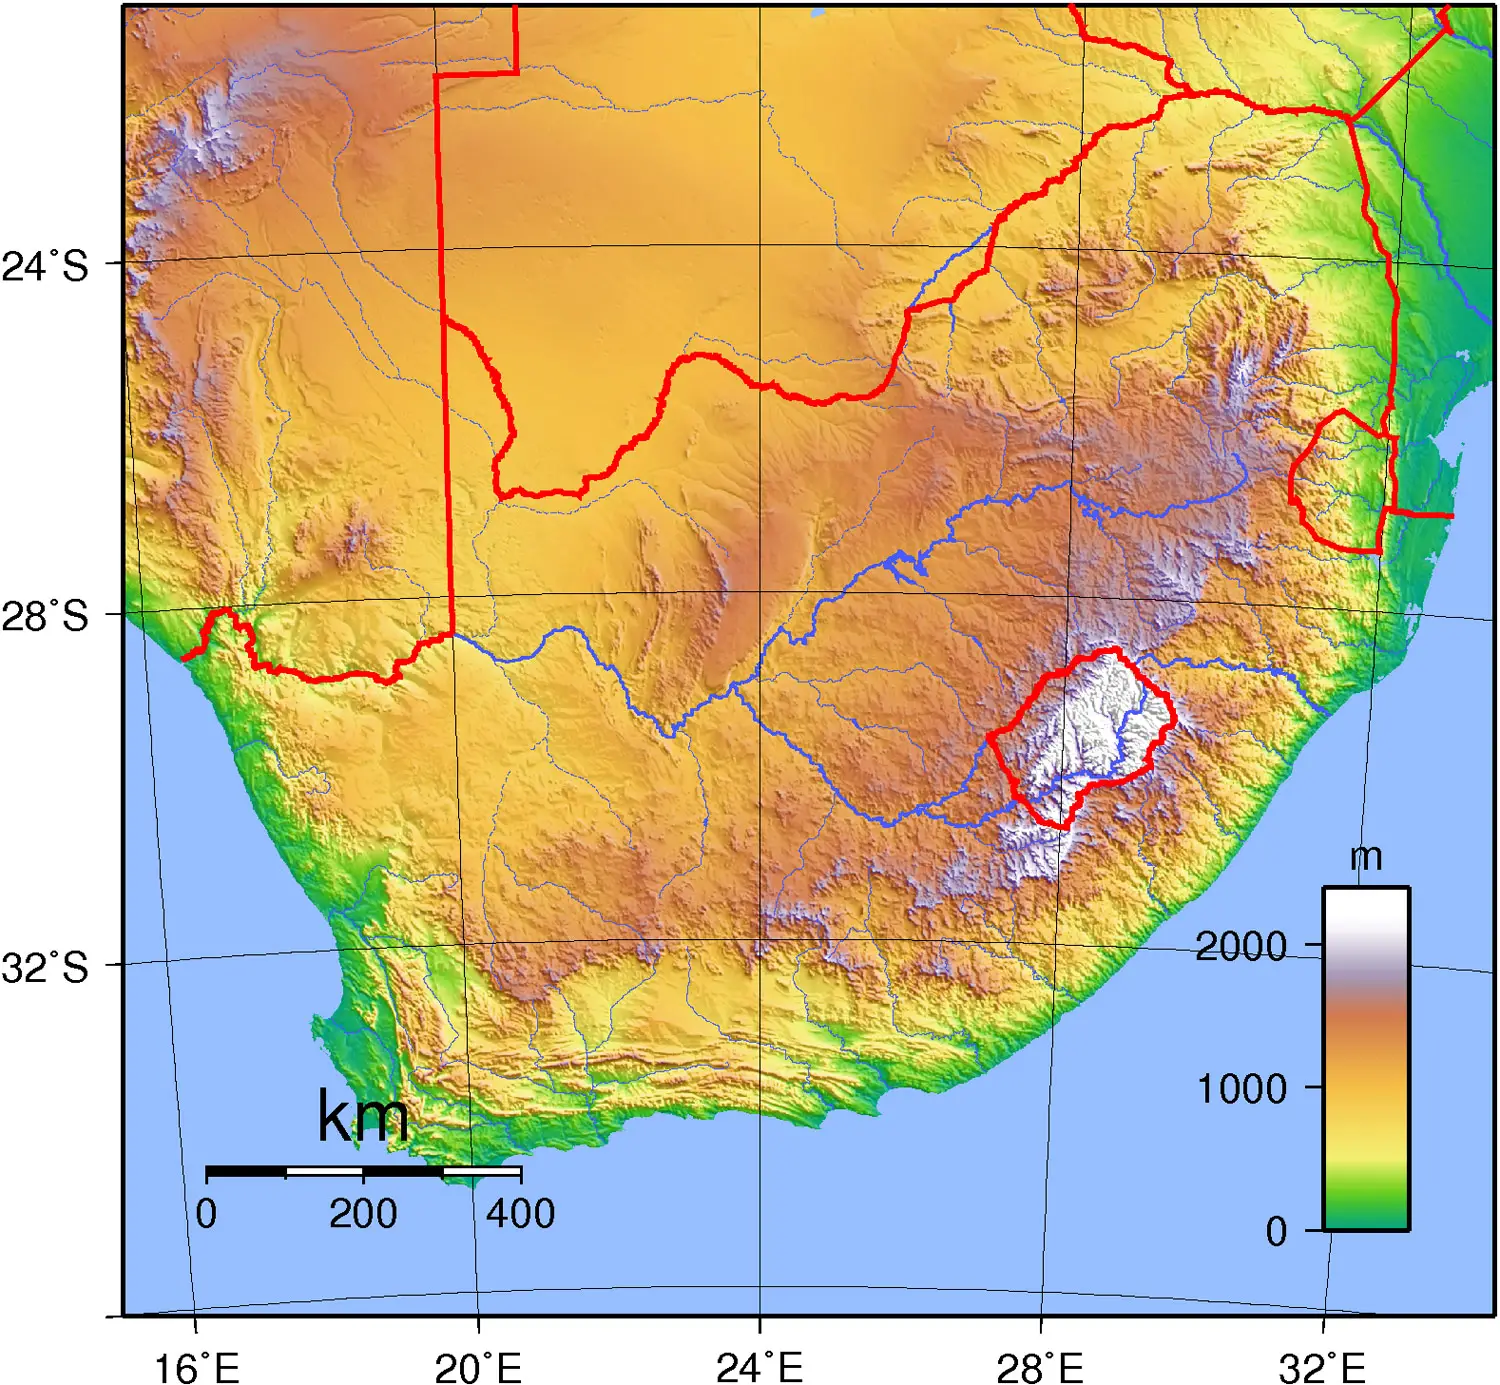 South Africa Topography